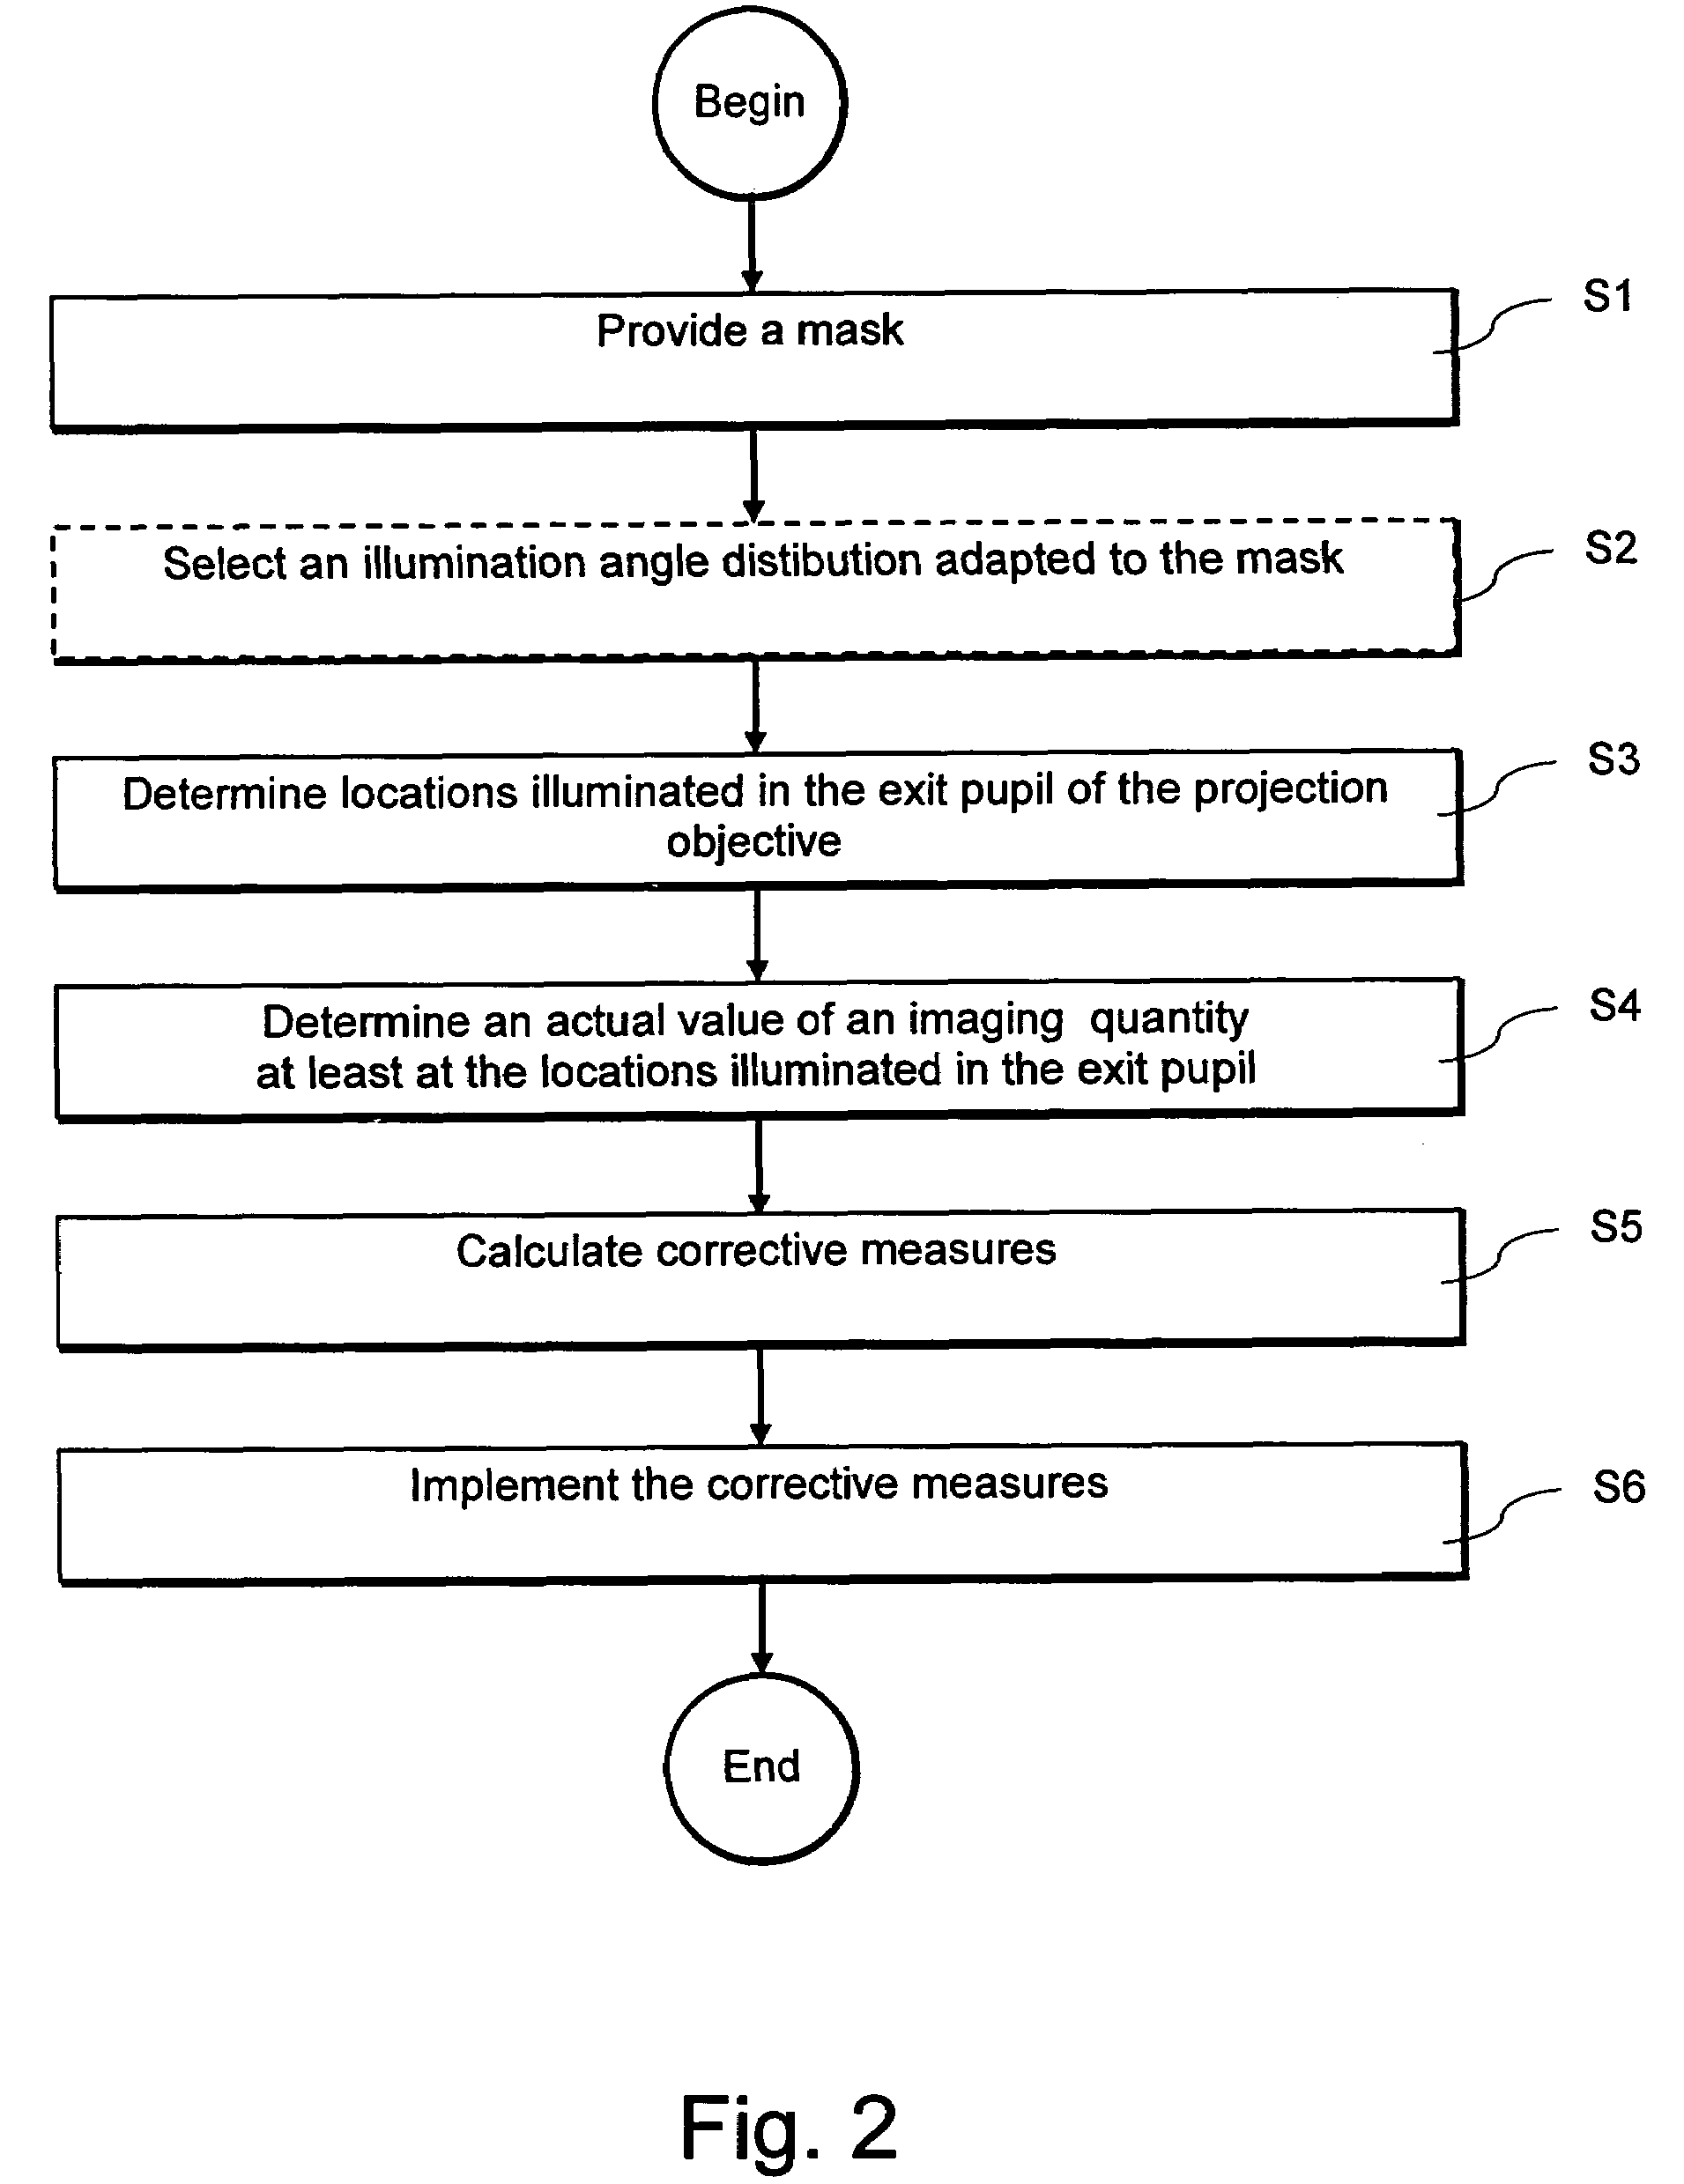 Method for improving the imaging properties of a projection objective for a microlithographic projection exposure apparatus